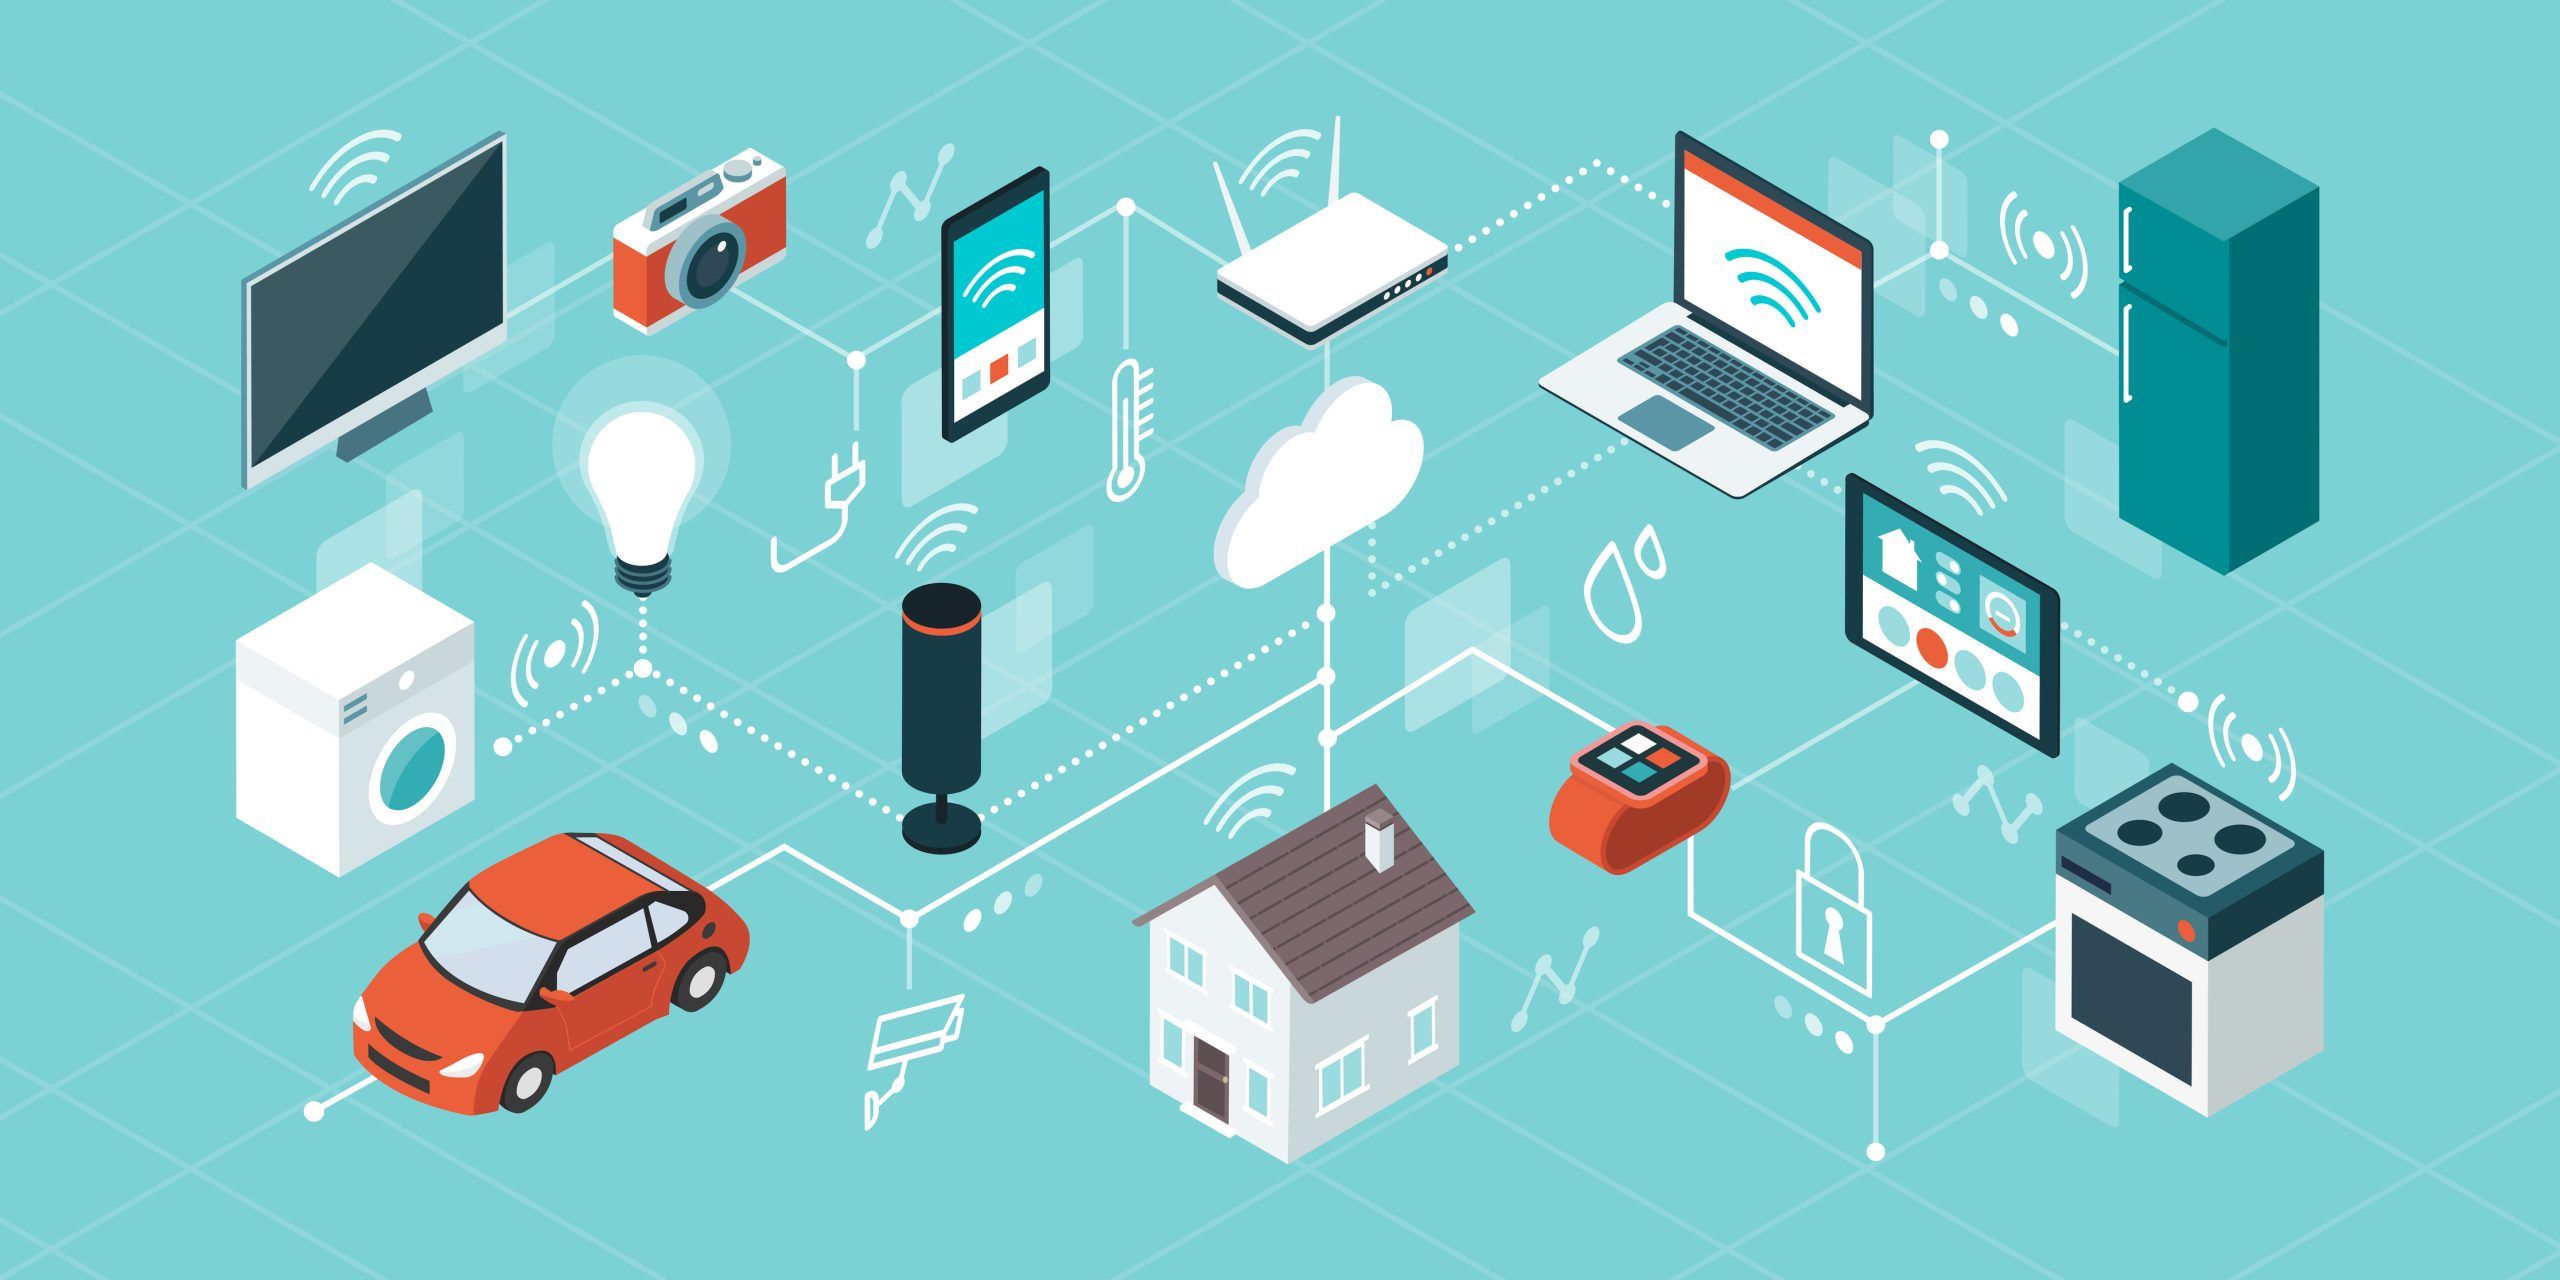 How Many Devices Are In The Internet Of Things